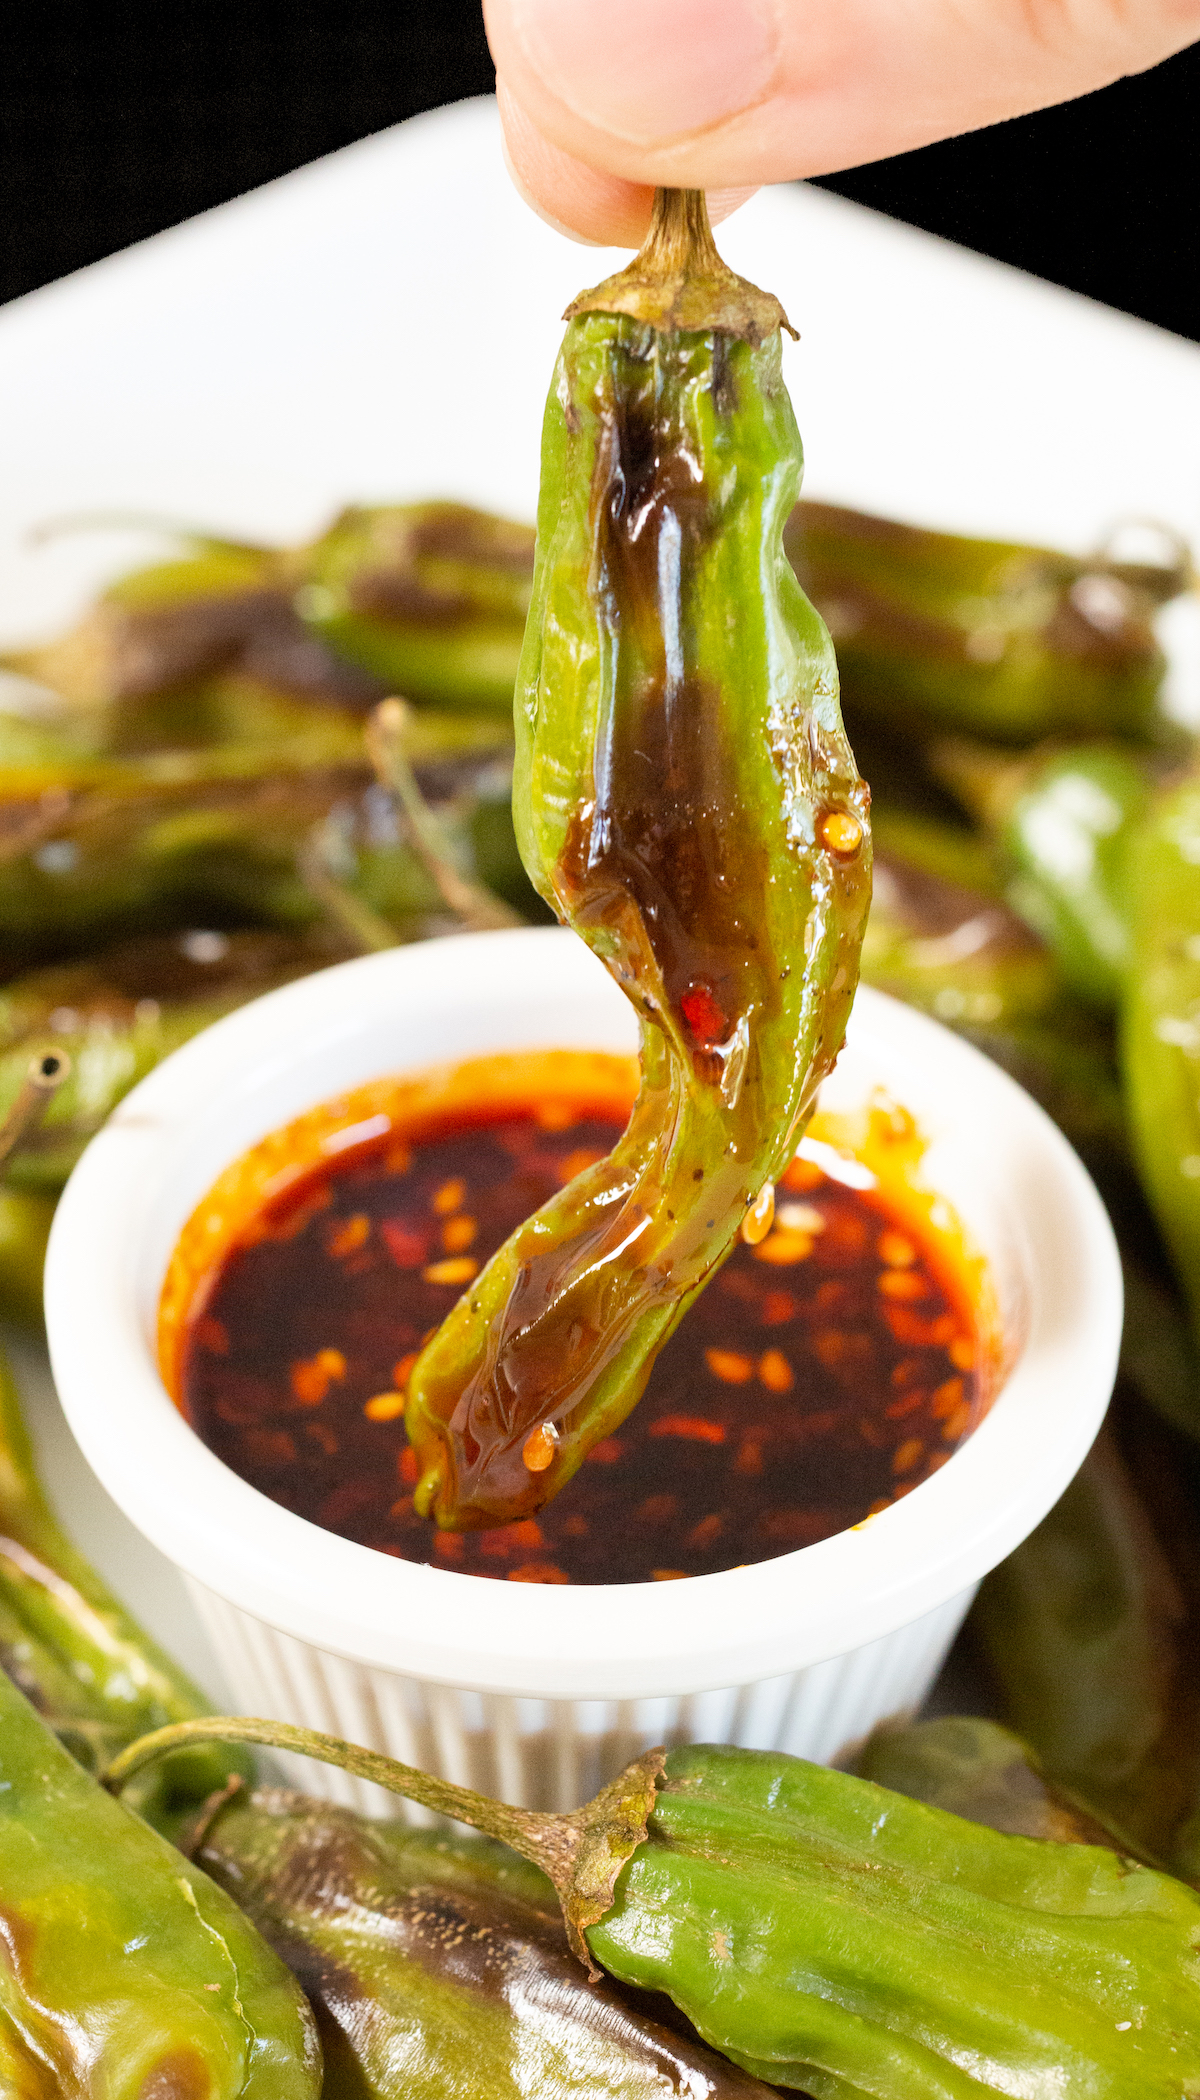 Two fingers hold a shishito pepper by the stem after it has been dipped in sauce.